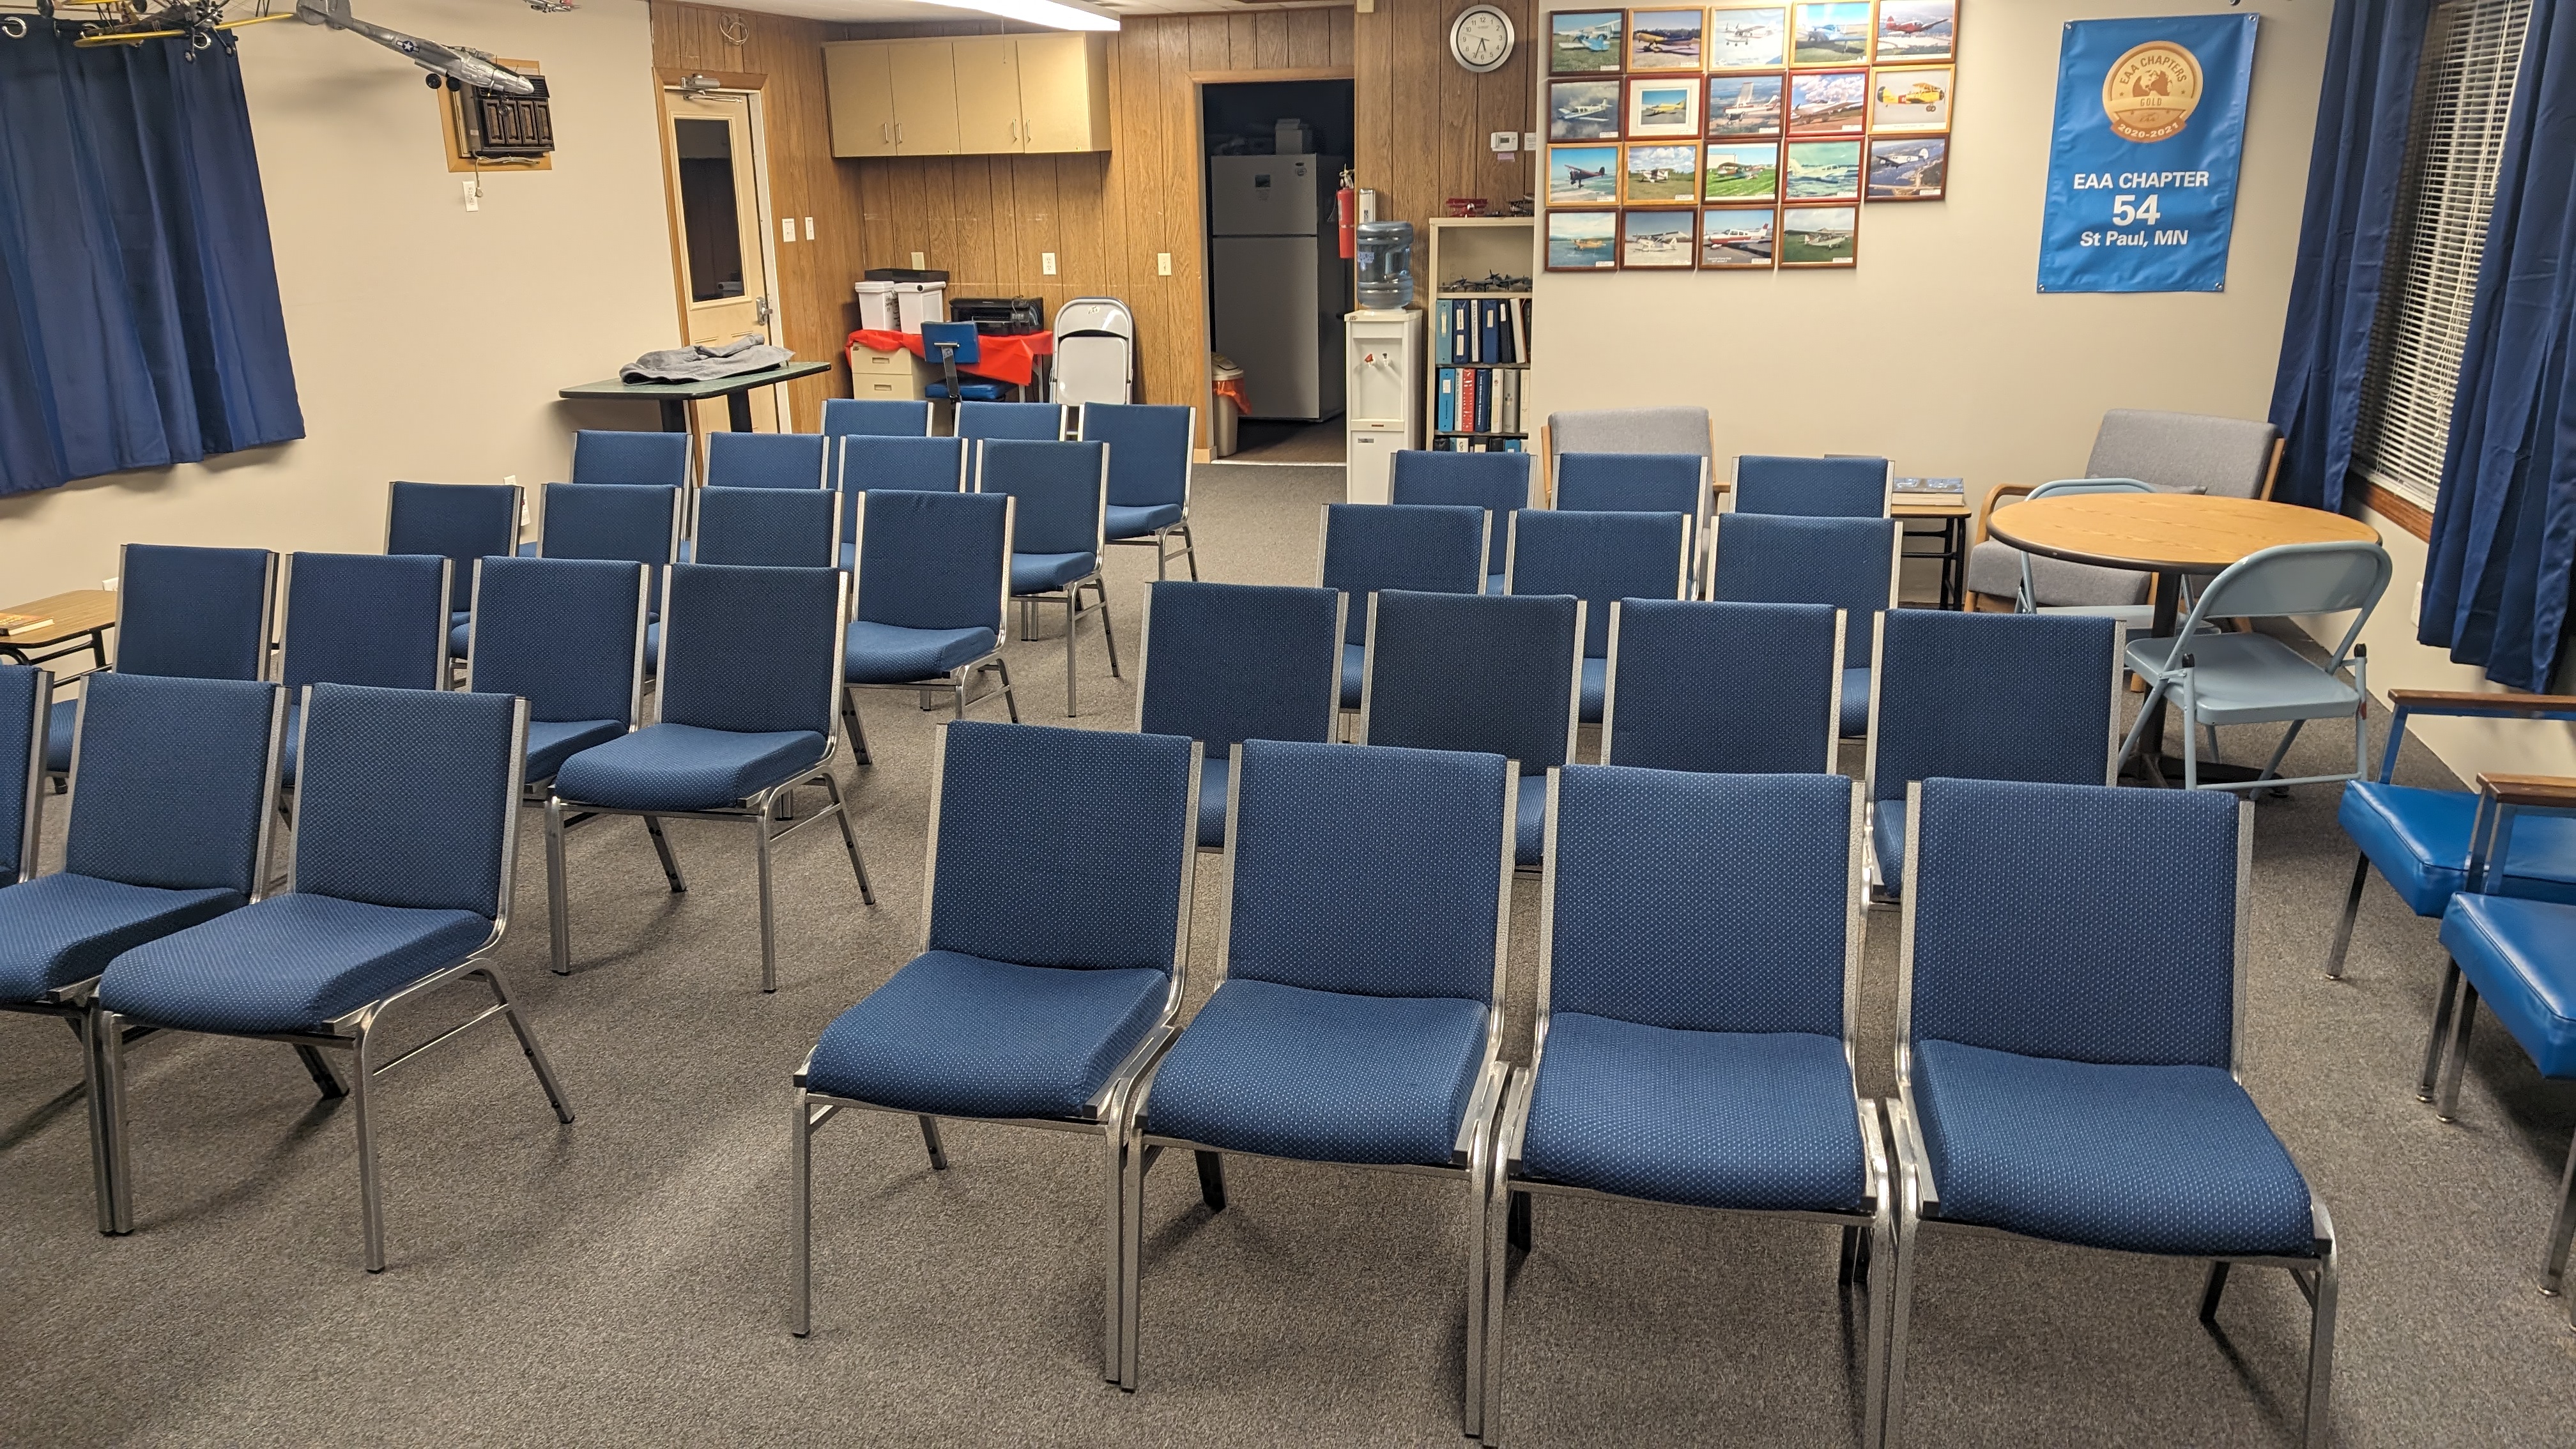 Thirty two fabric padded chairs have been added